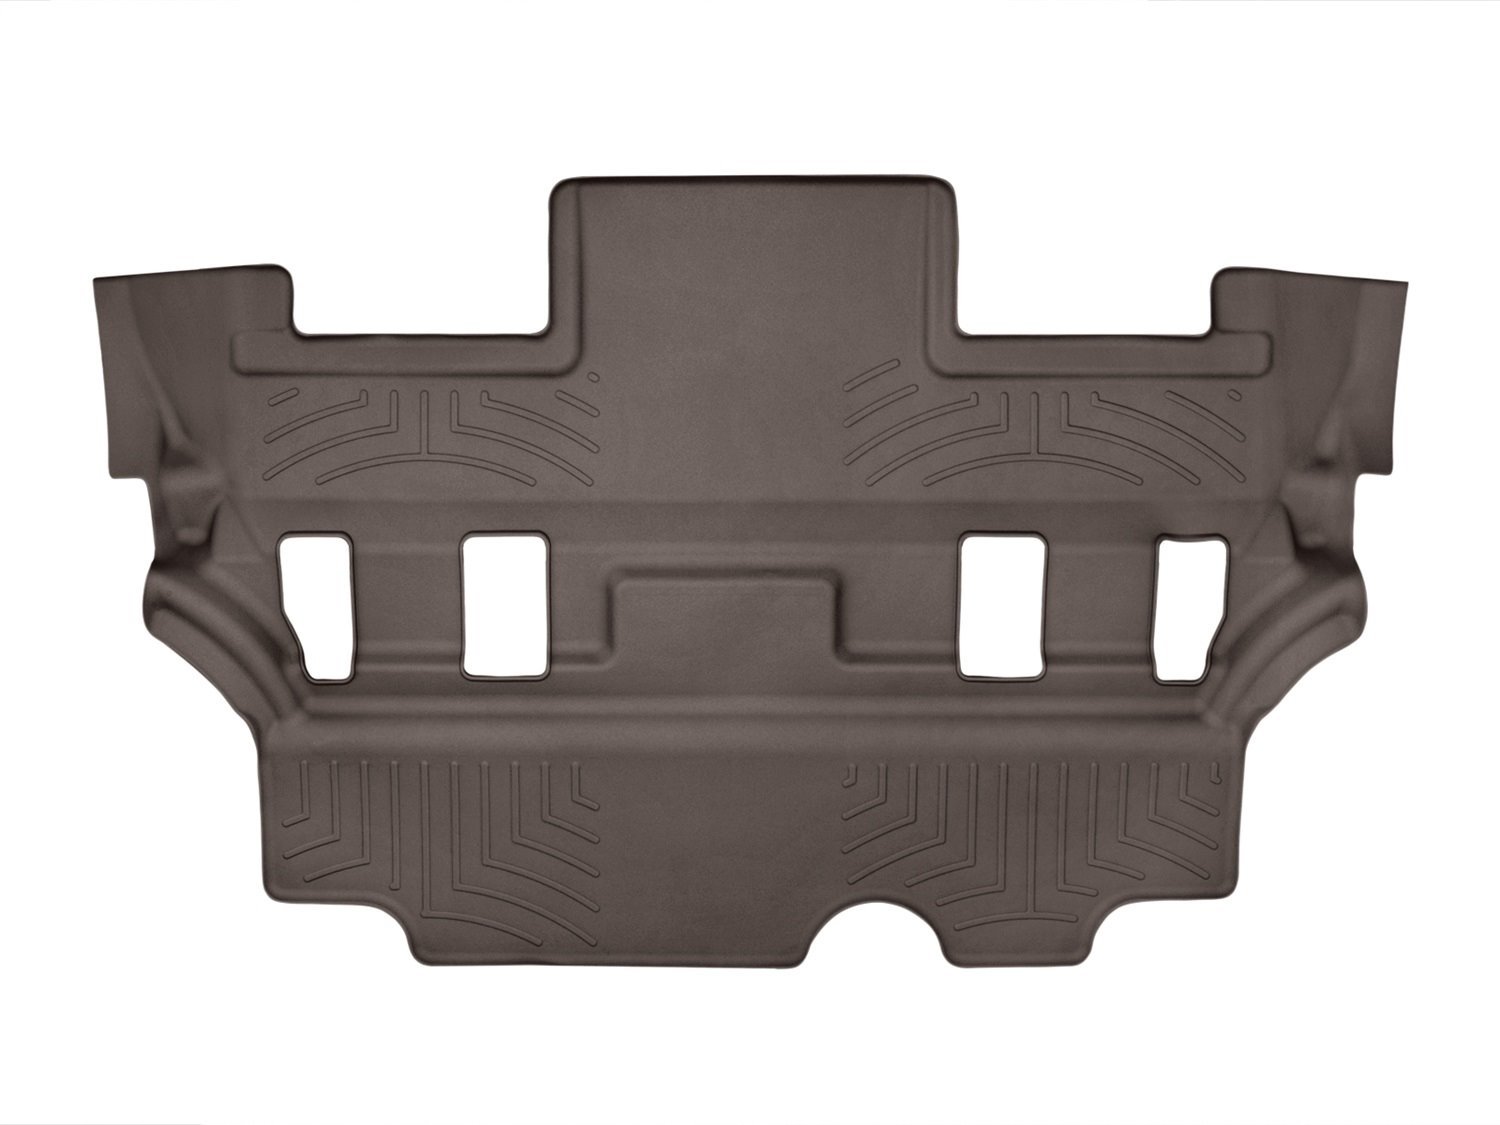 REAR FLOORLINER COCOA CADILLAC ESCALADE 2015-2017 FITS VEHICLES WITH 2ND ROW BUCKET SEATS